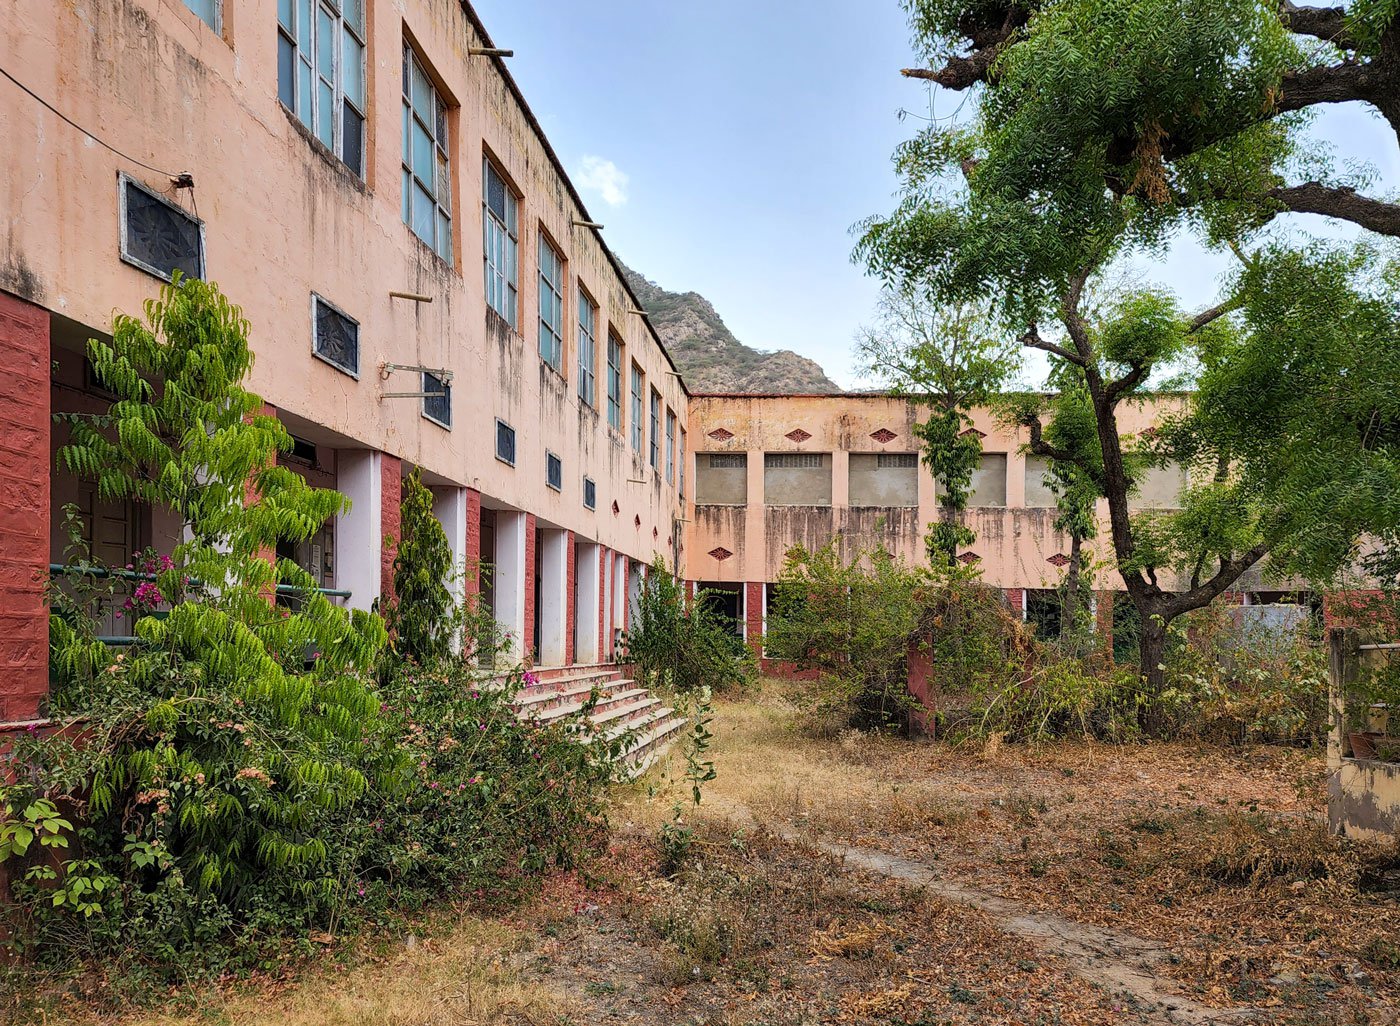 The school, which once awed Mahatma Gandhi, now stands empty and unused